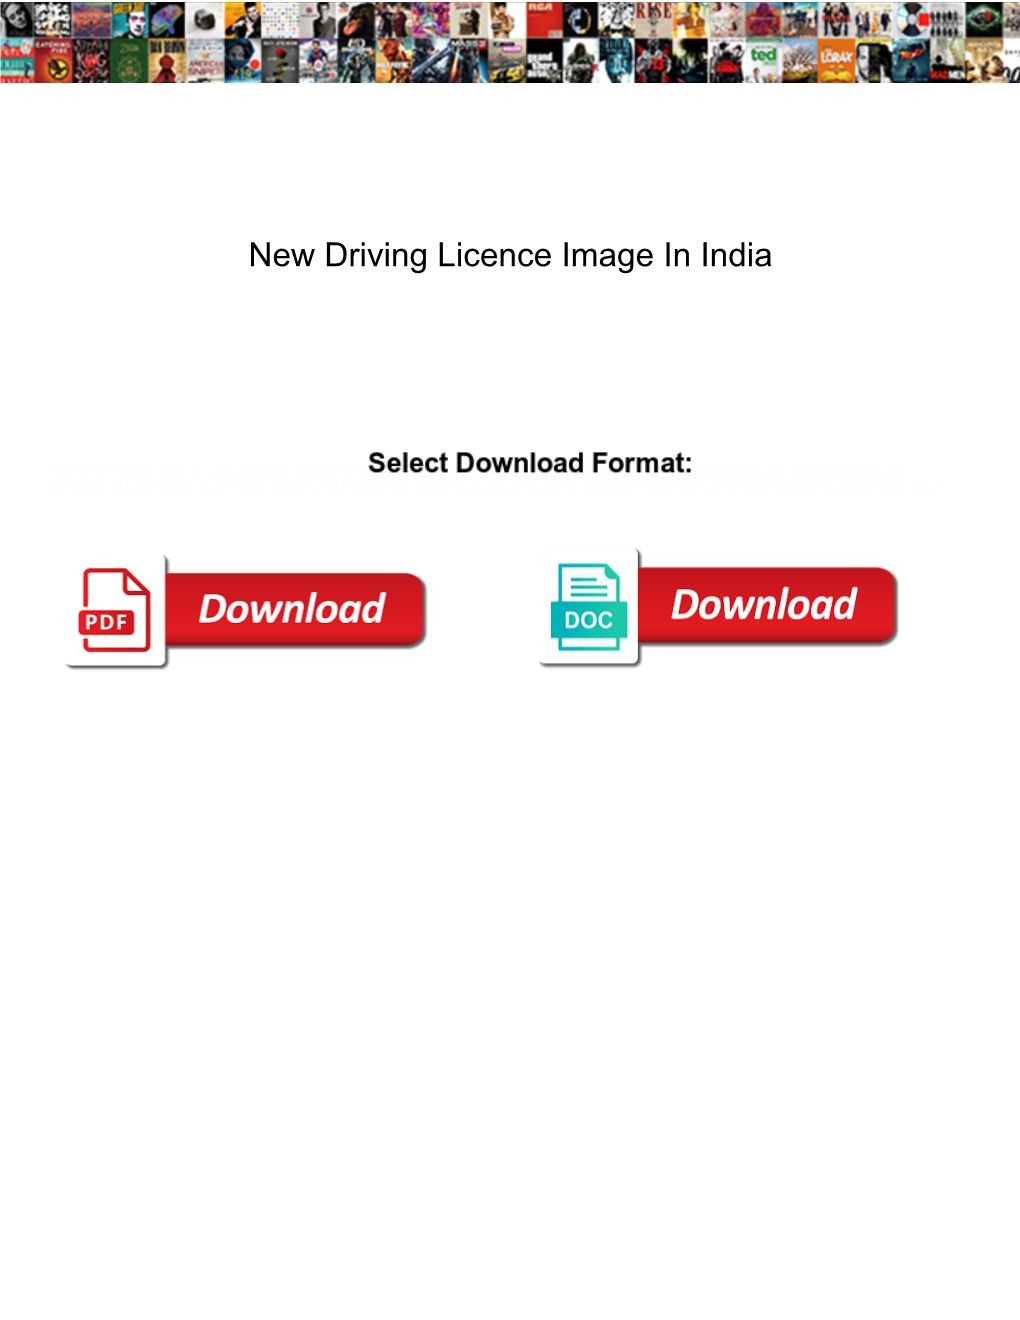 New Driving Licence Image in India